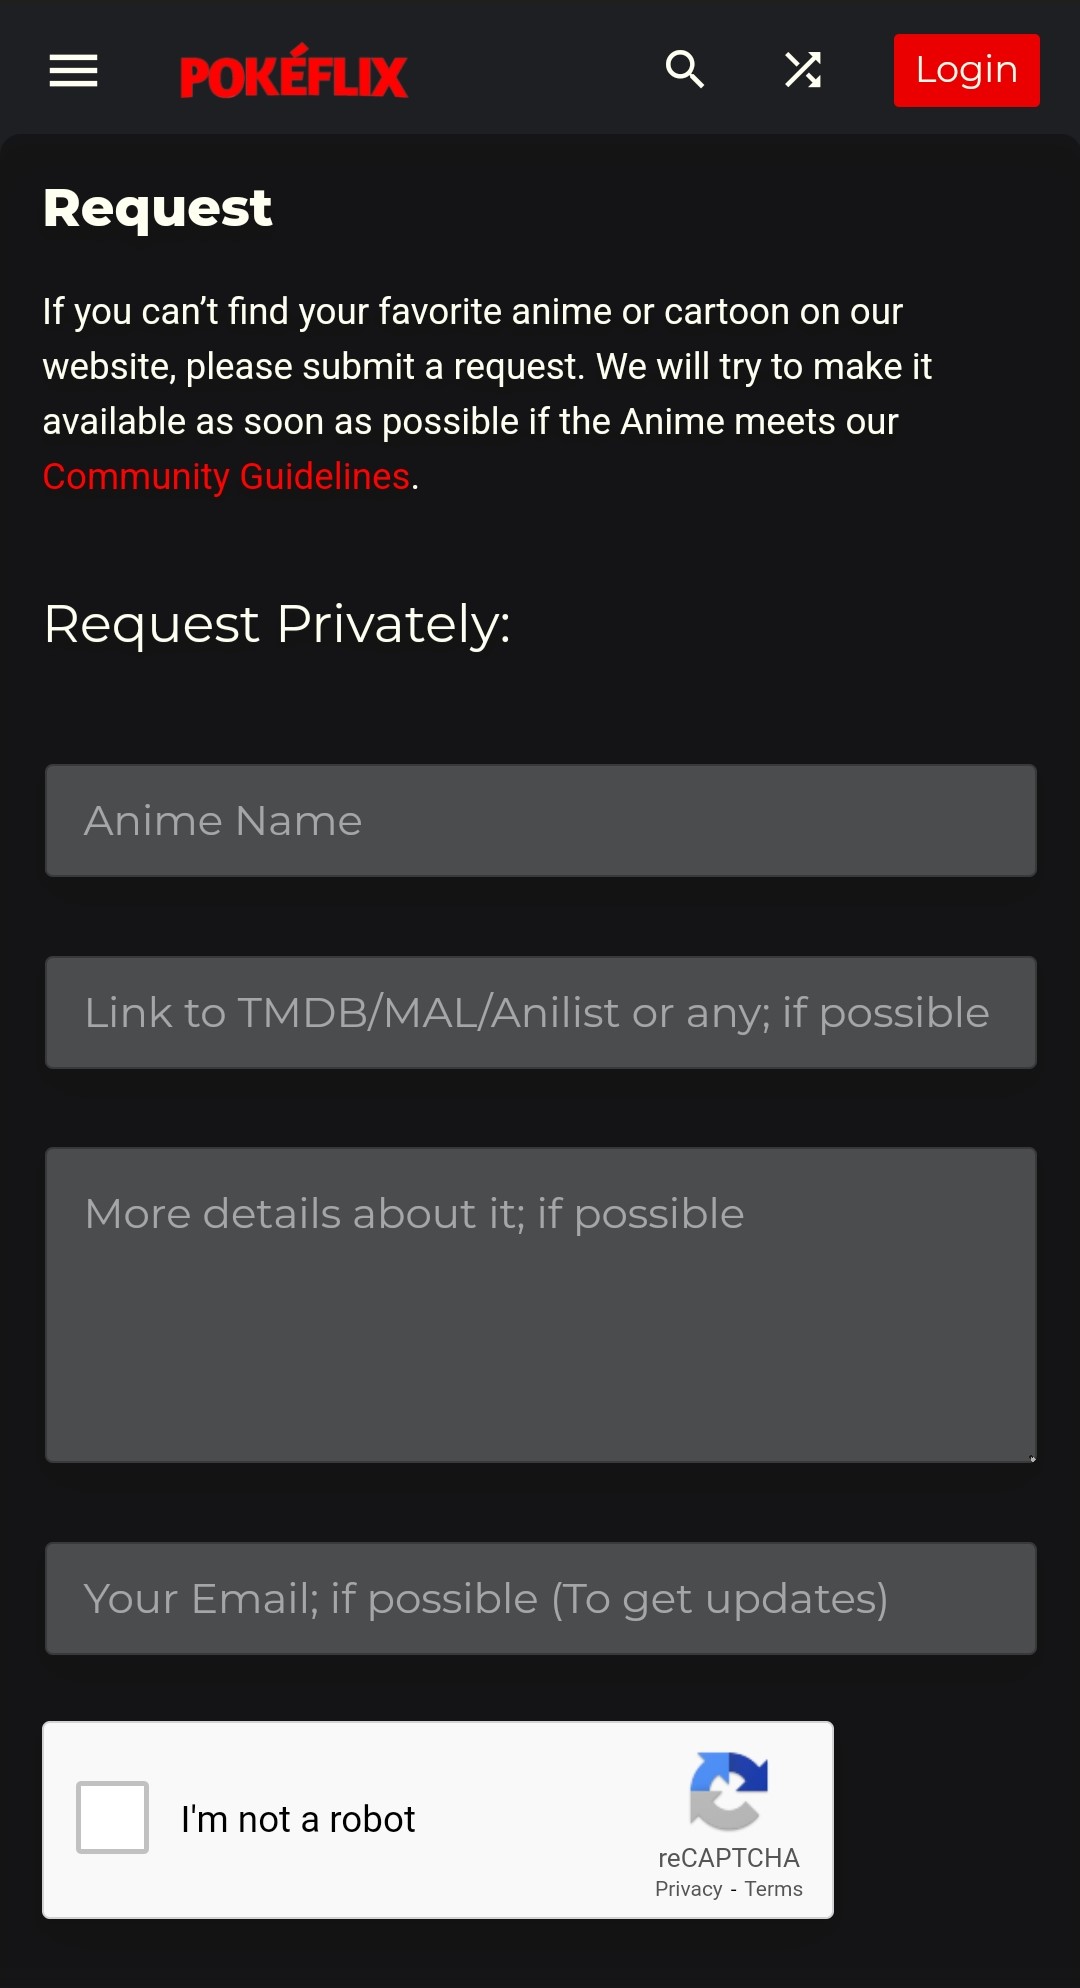 Send us new anime request anonymously